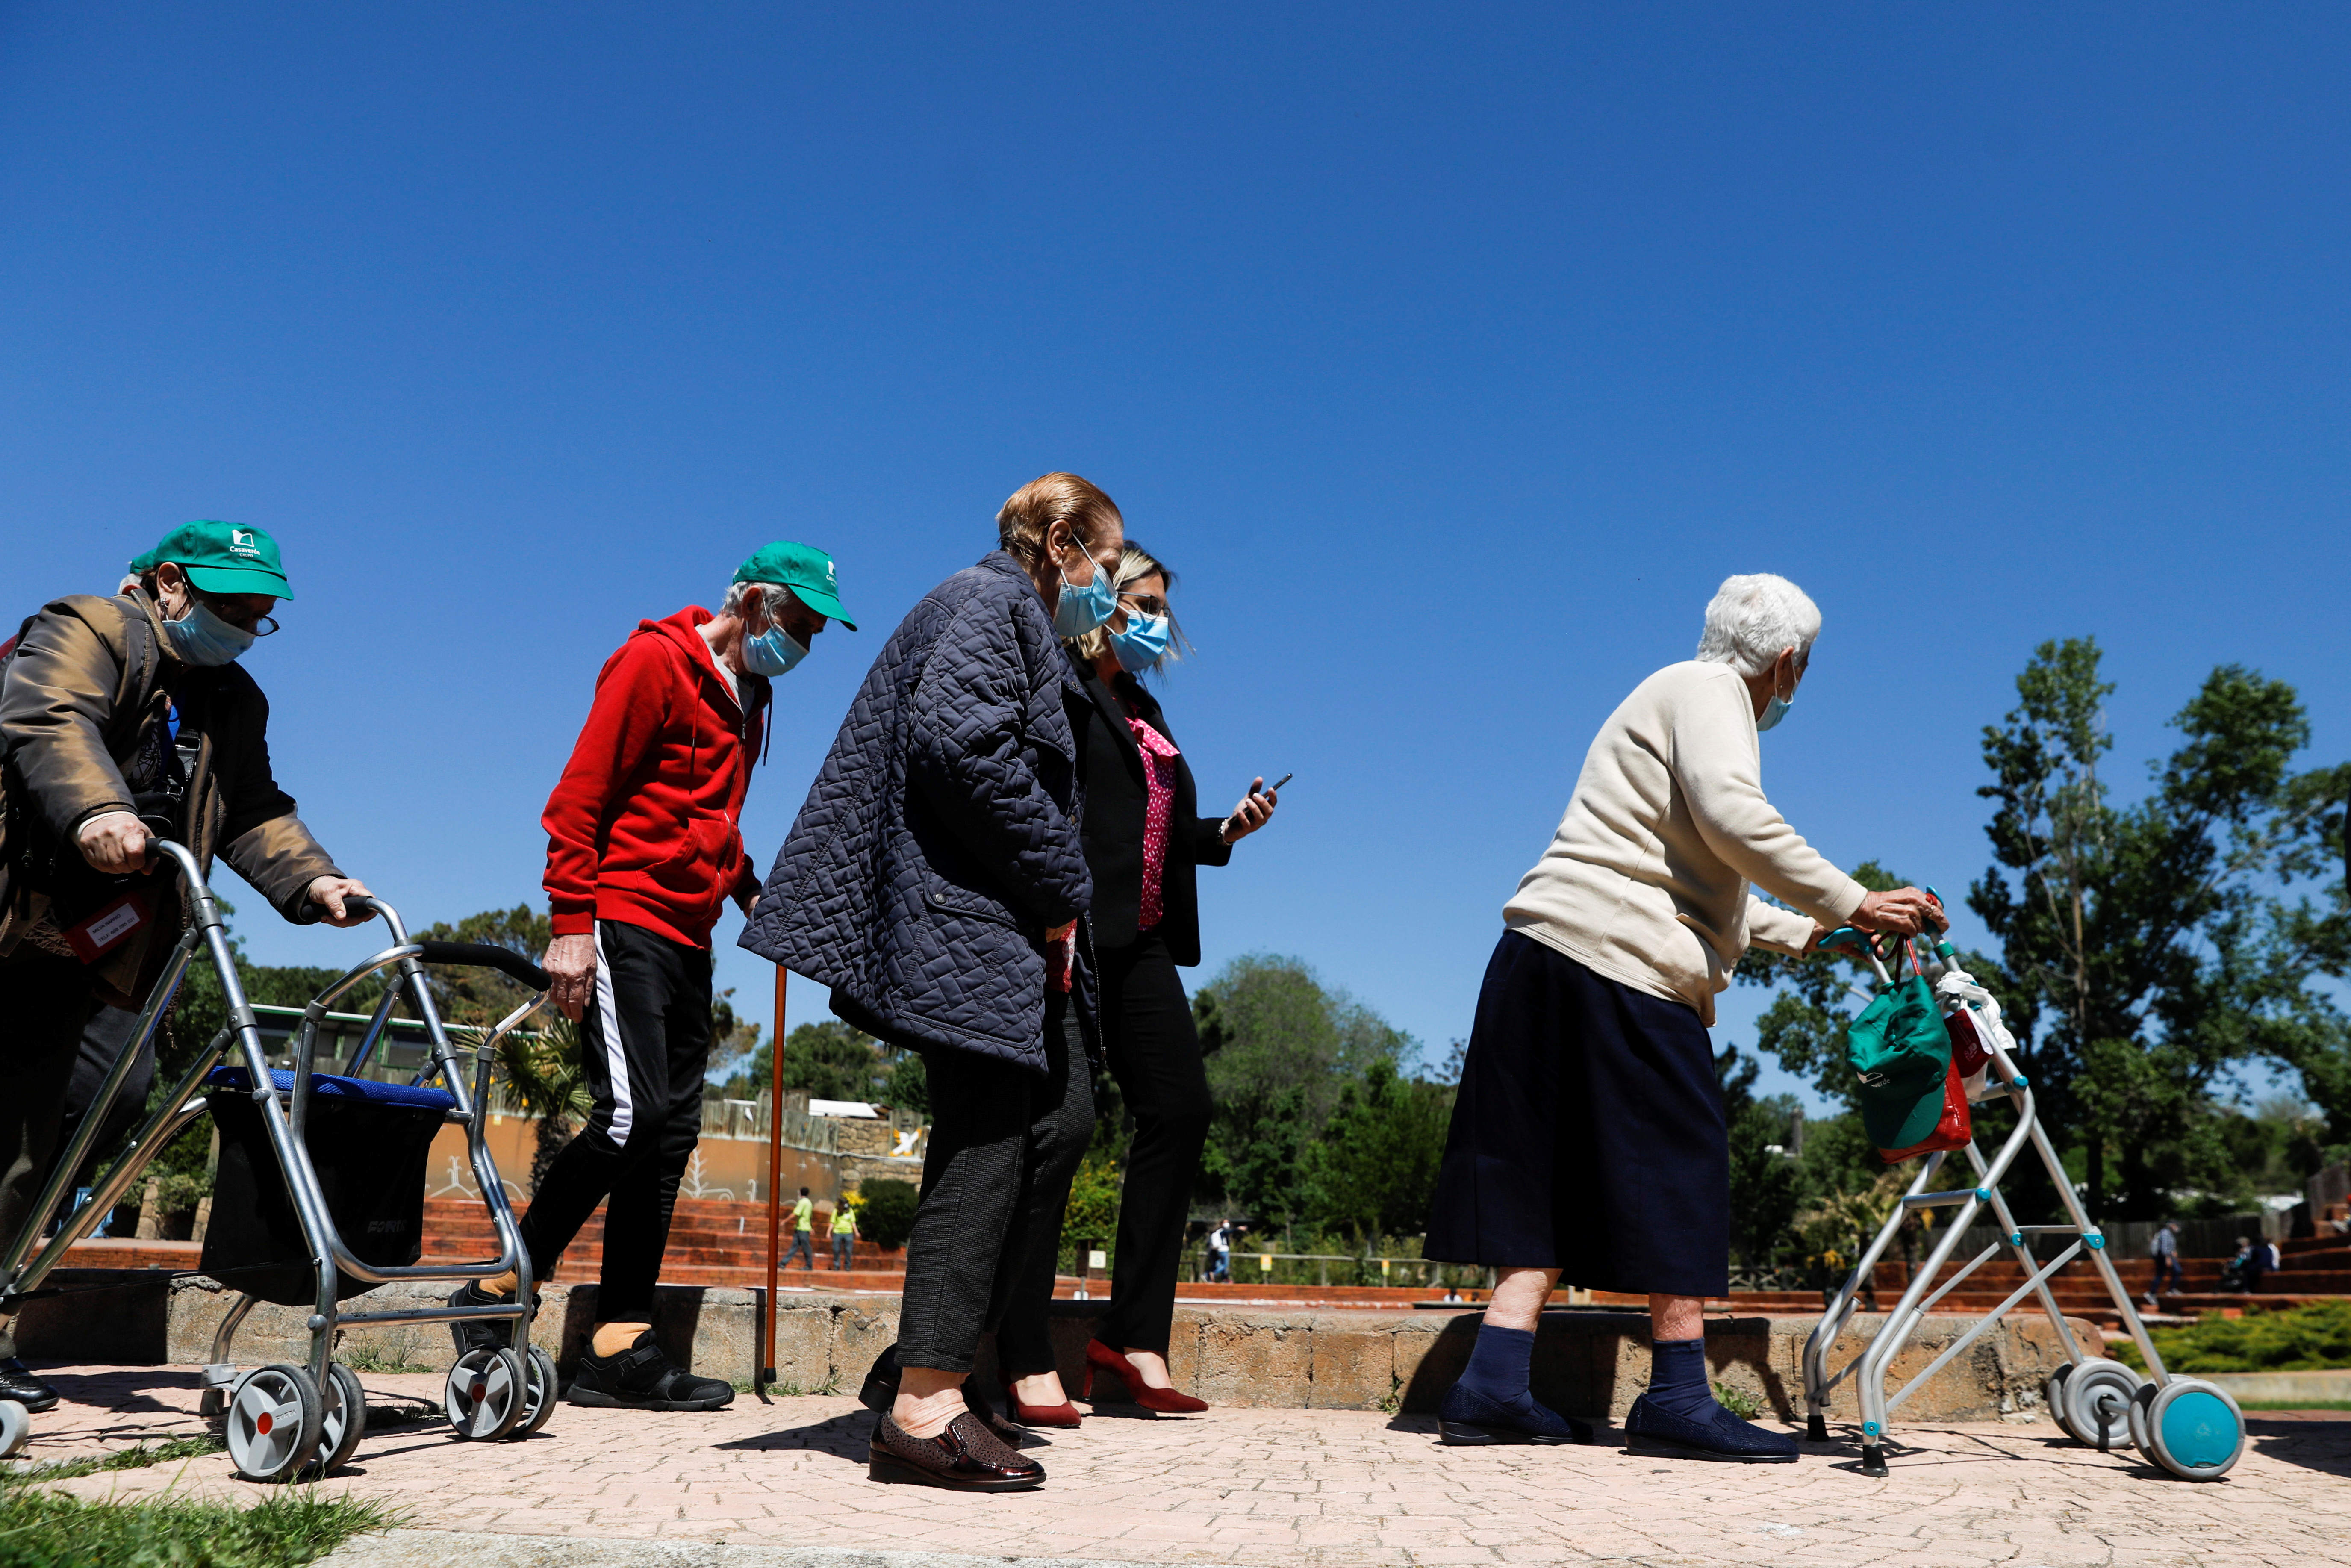 Residents from Casaverde nursing homes visit the zoo during their first group outing since the start of the coronavirus disease (COVID-19) pandemic, in Madrid, Spain, May 5, 2021. REUTERS/Susana Vera